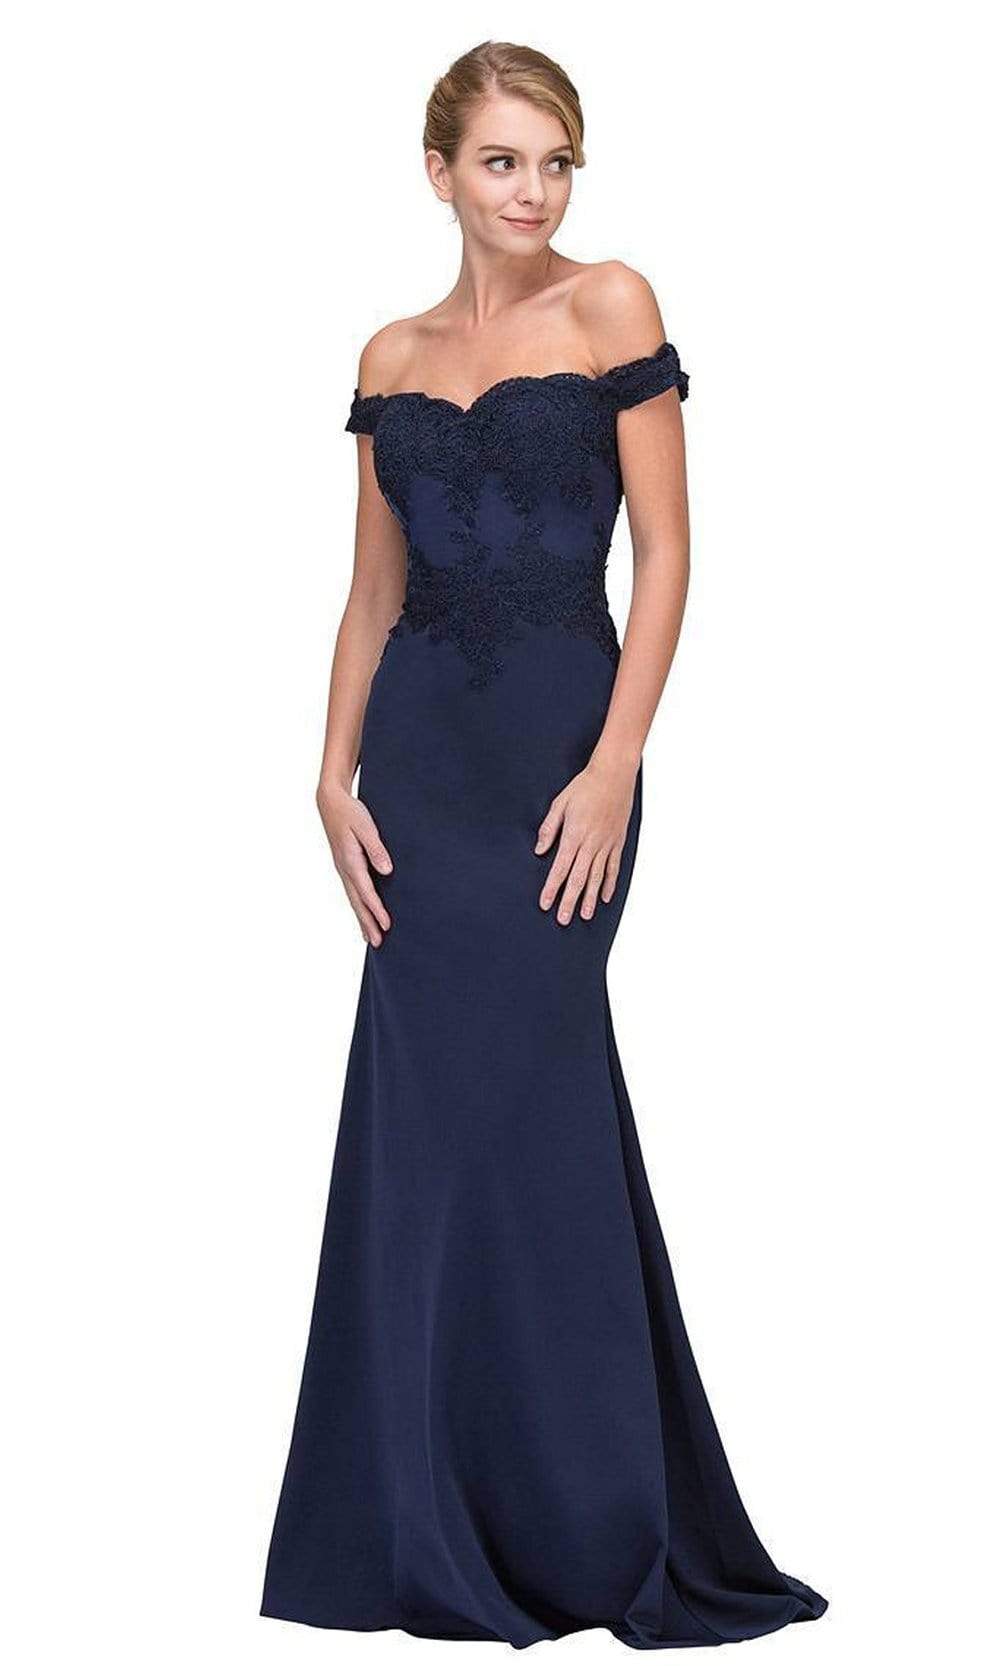 Image of Eureka Fashion - 7100 Off Shoulder Lace Appliqued Jersey Mermaid Gown